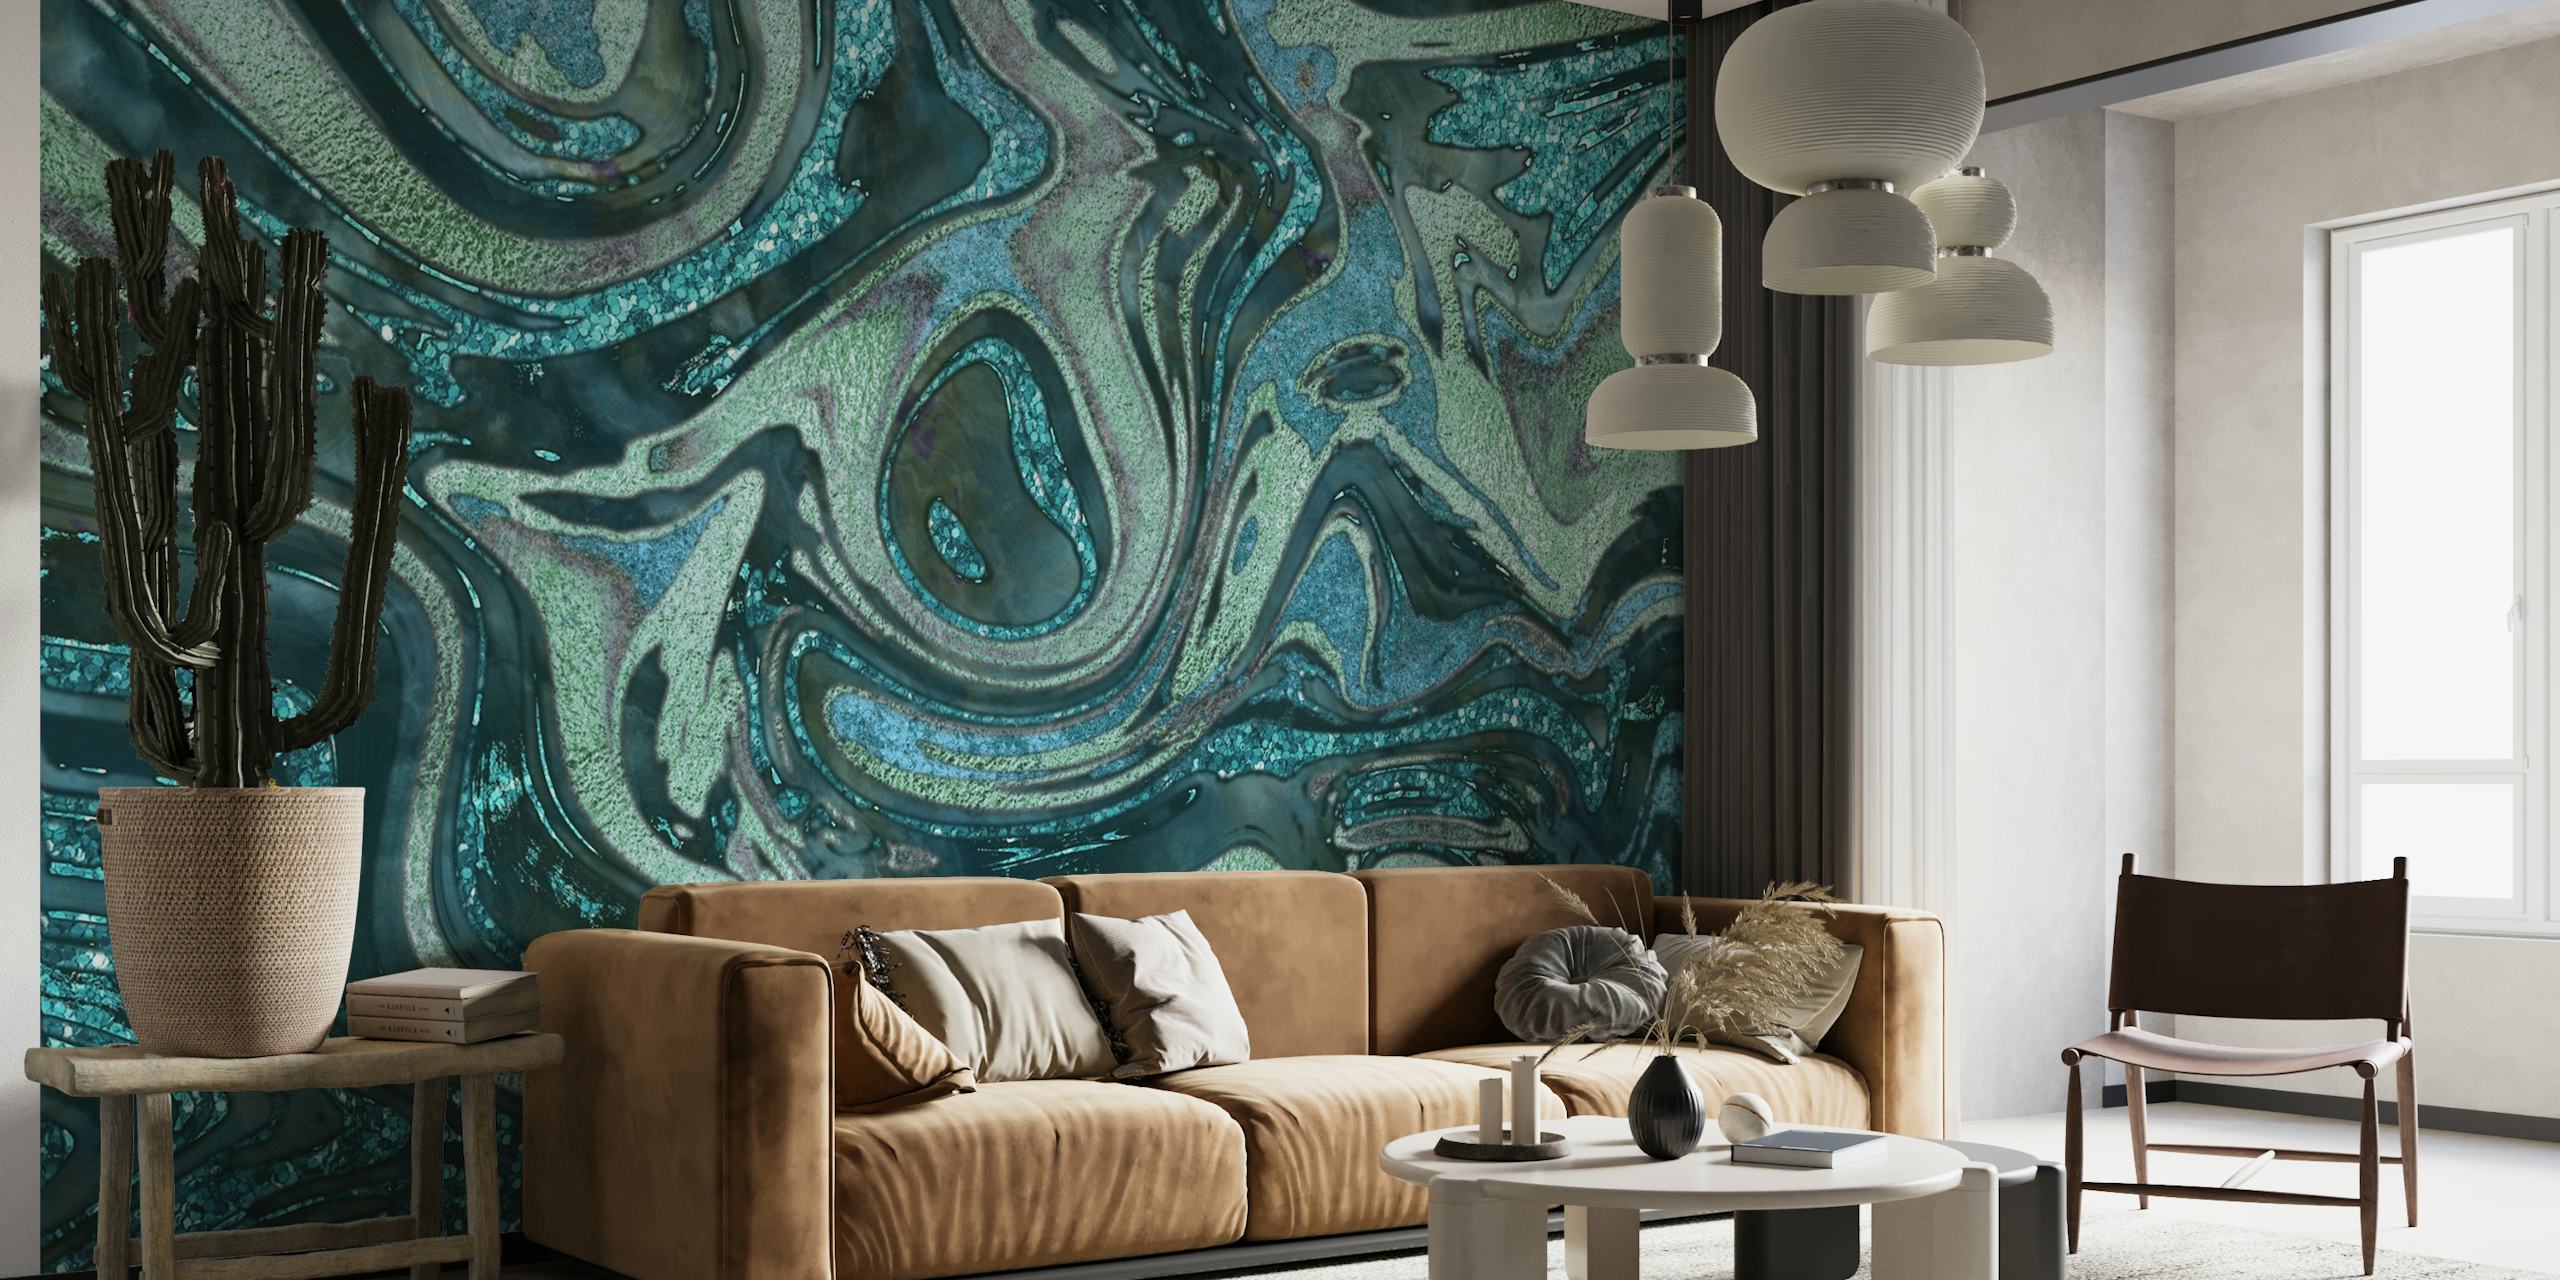 Magic Marble Turquoise Teal wall mural with swirling patterns